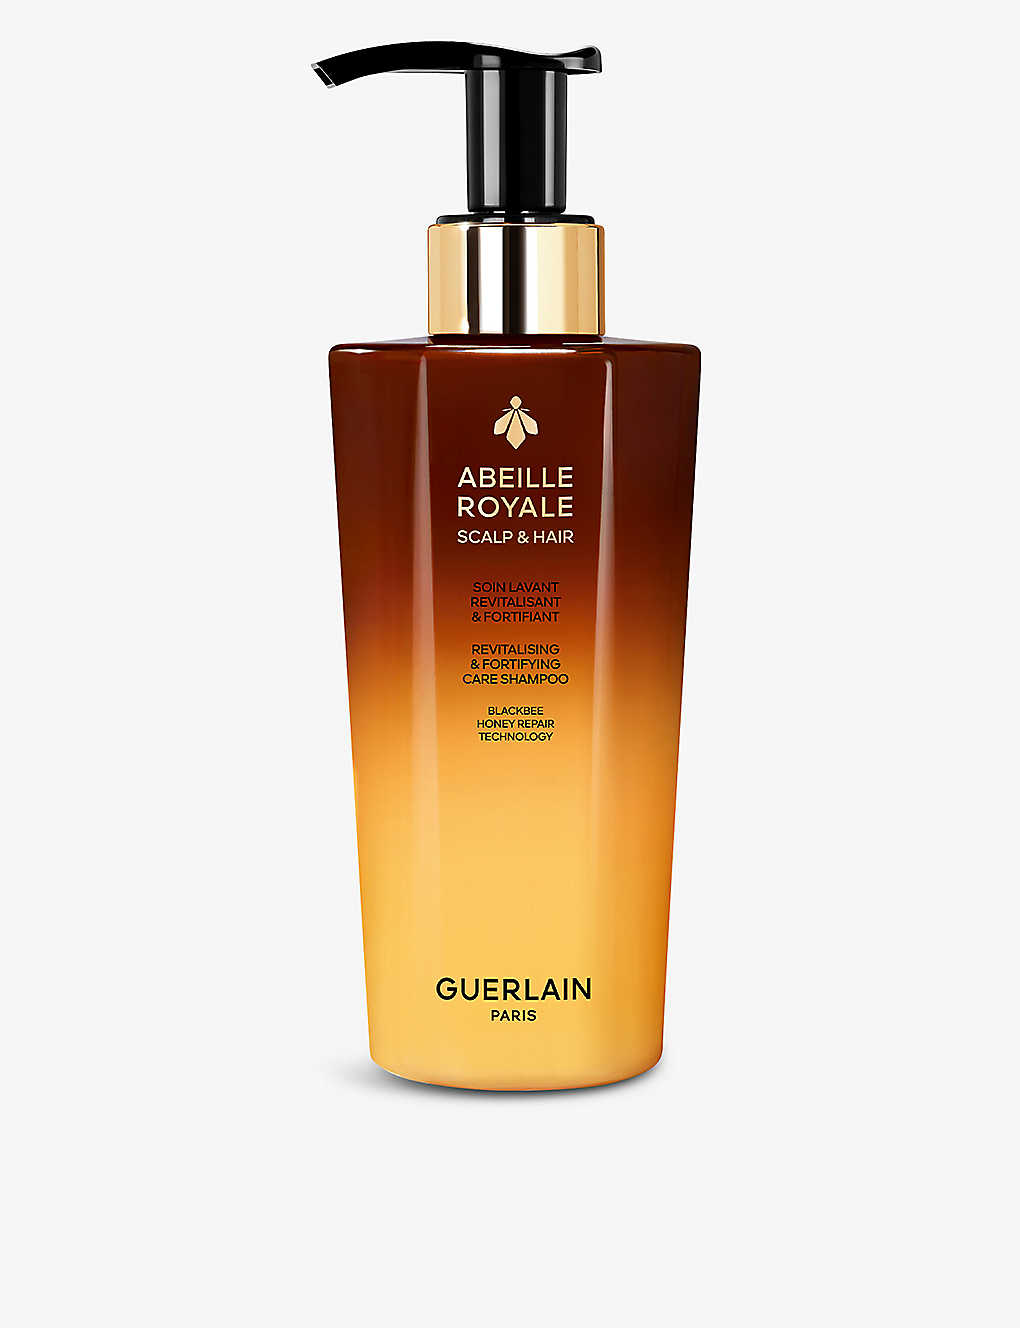 Guerlain Abeille Royale Revitalising And Fortifying Care Shampoo